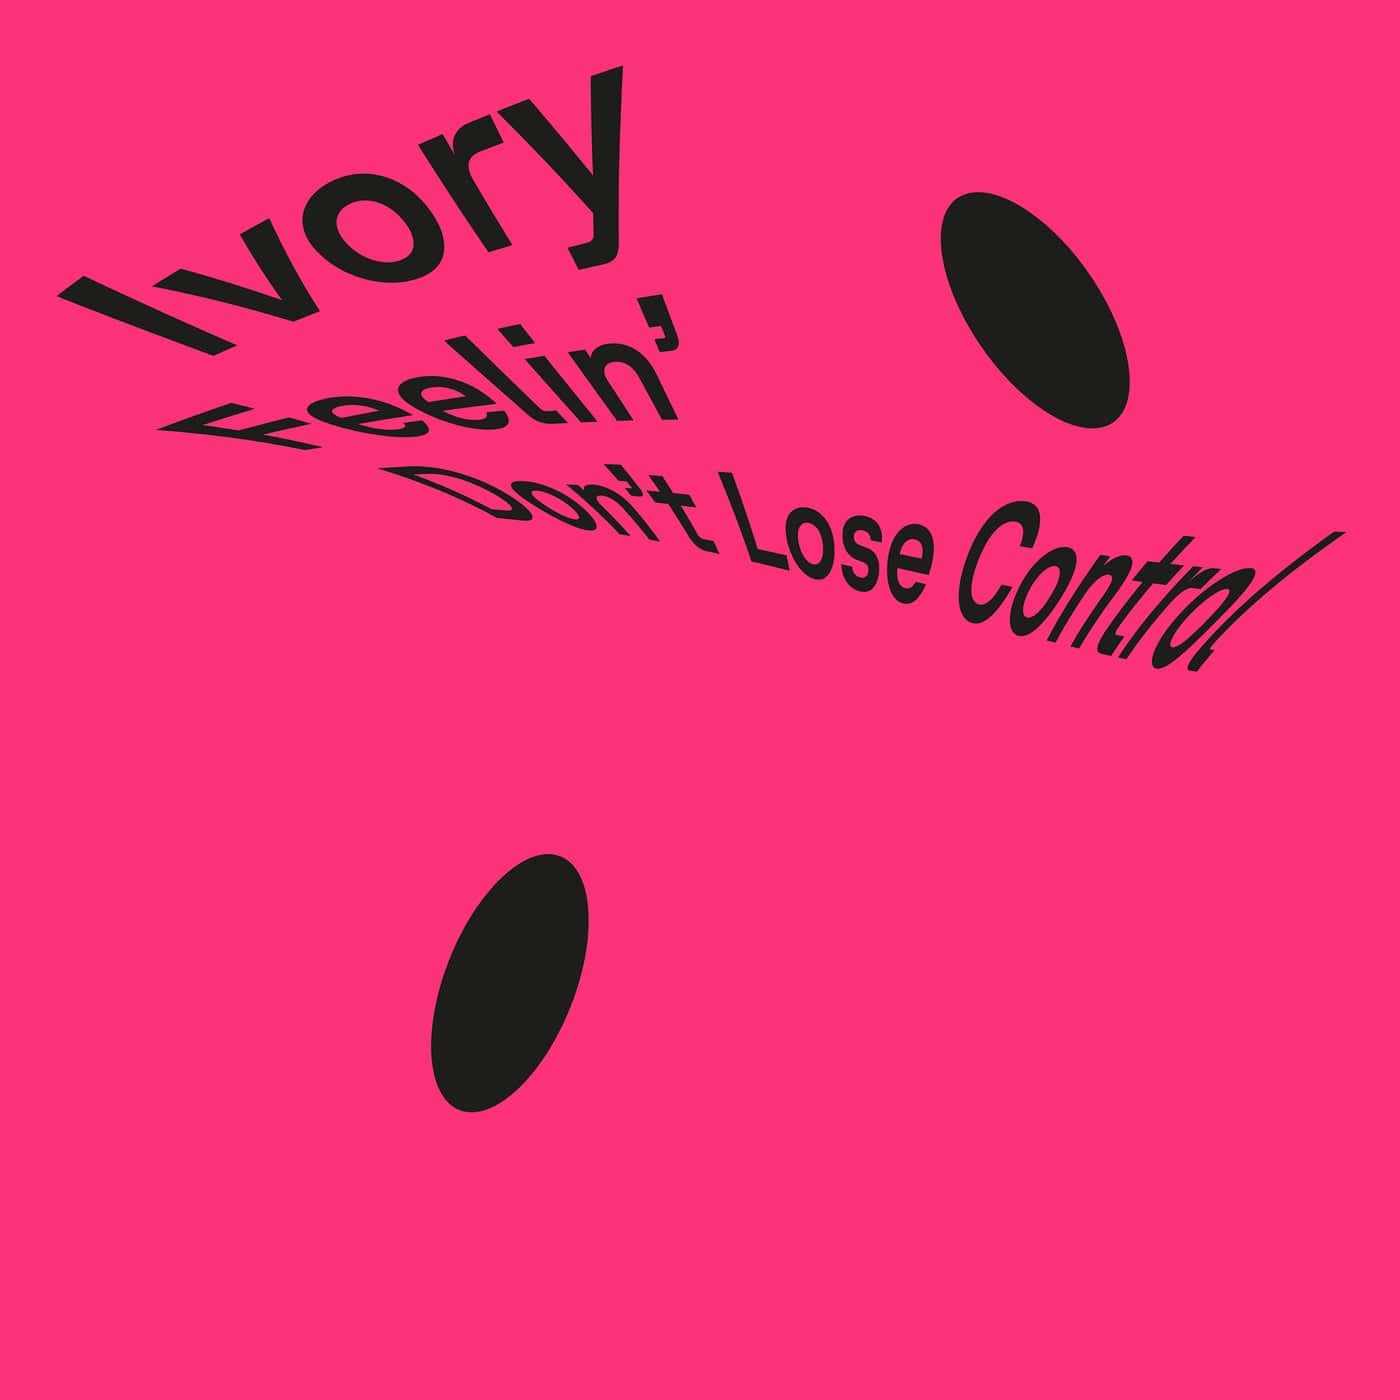 Download Ivory (IT) - Feelin' / Don't Lose Control on Electrobuzz